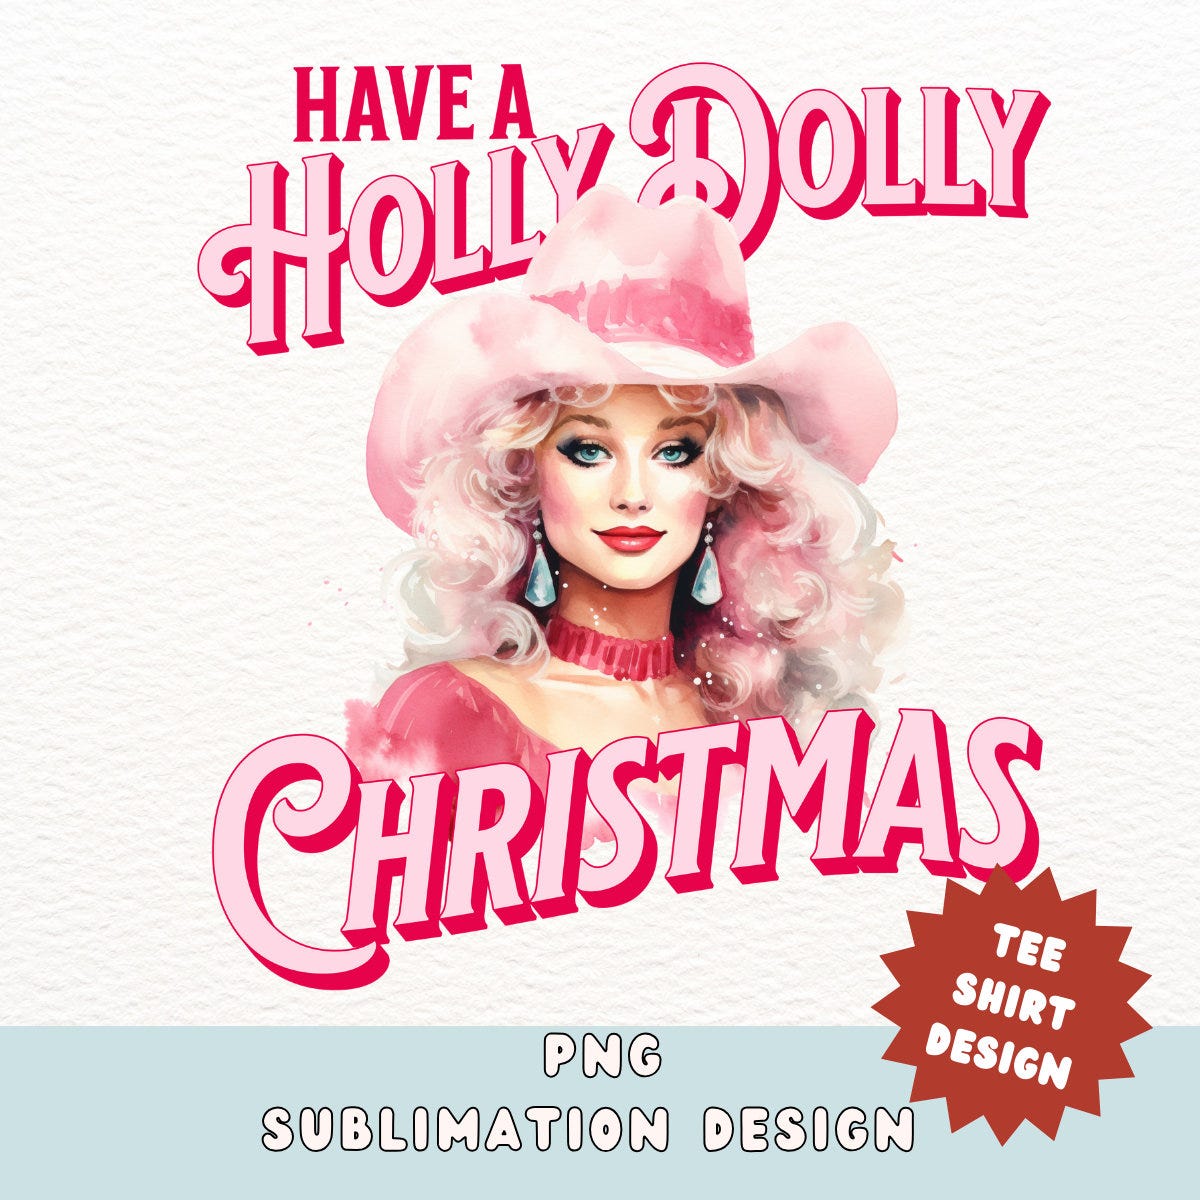 Have A Holly Dolly Christmas PNG, Sublimation Design for a T-shirt, Christmas Sublimation, Vintage Christmas PNG Sublimation